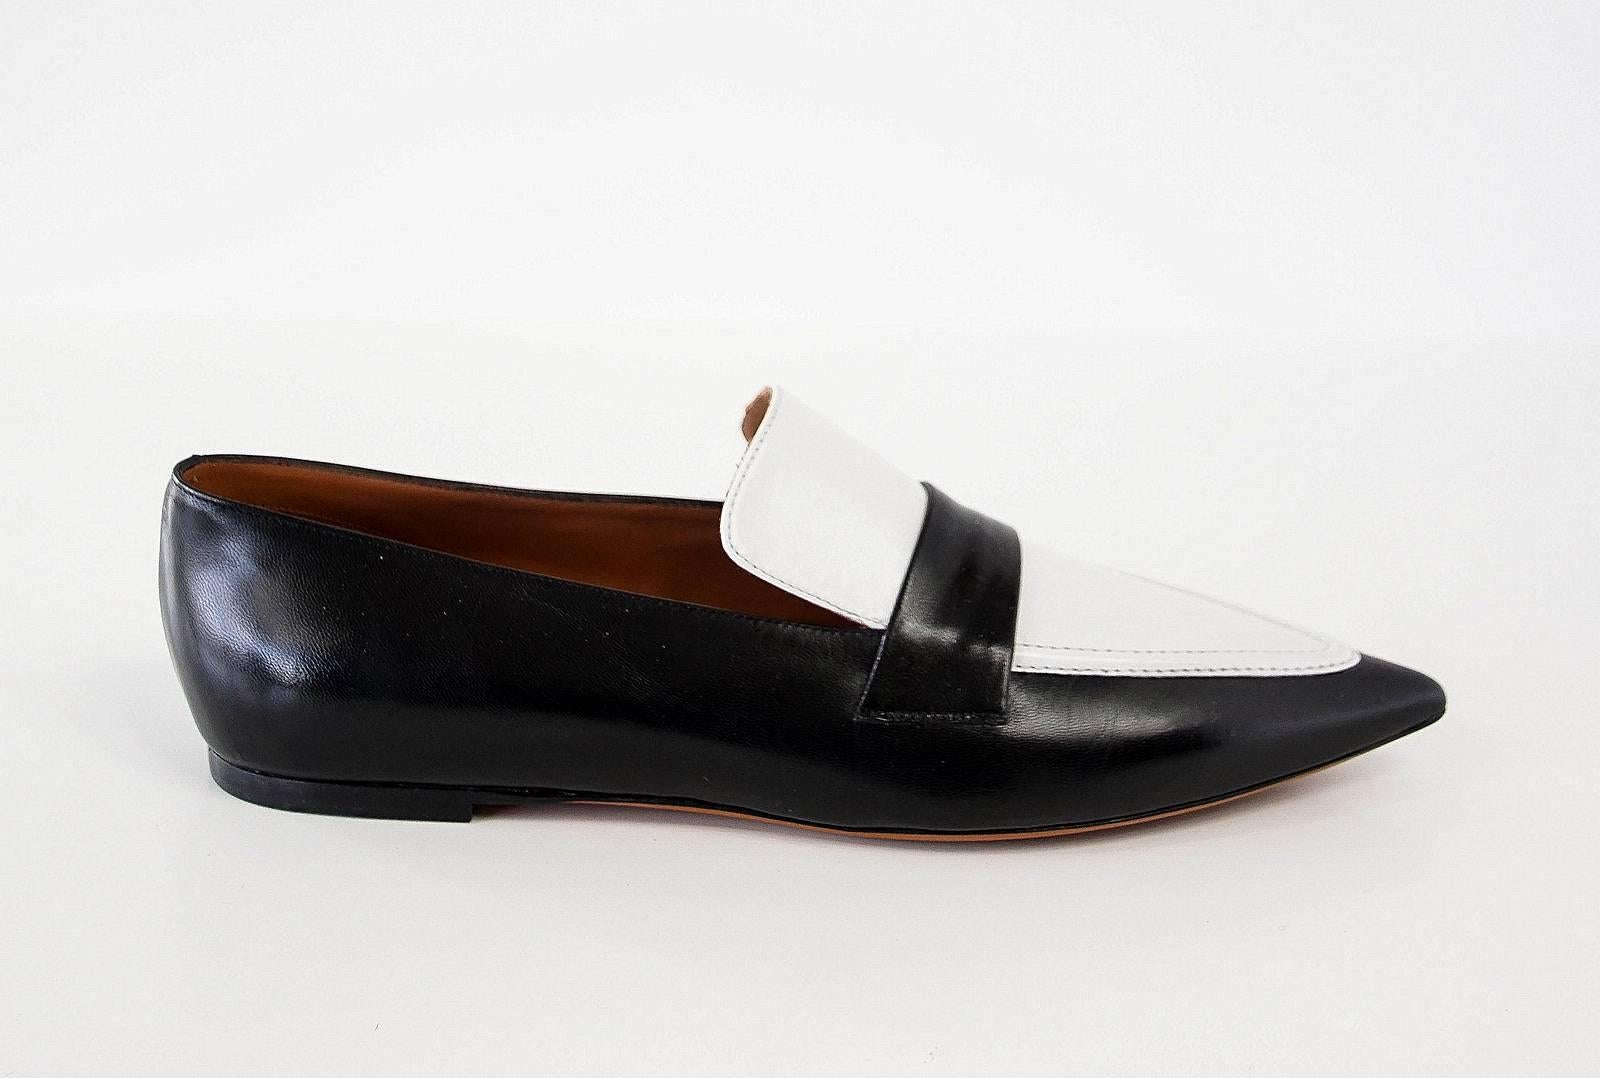 Guaranteed authentic CELINE modern penny loafer style shoe.
Pointed toe black and white loafer.
Classic and very chic!
NEW or NEVER WORN.
final sale
 
SIZE 39
USA SIZE 9

SHOE MEASURES:
UPPER SOLE 10.25